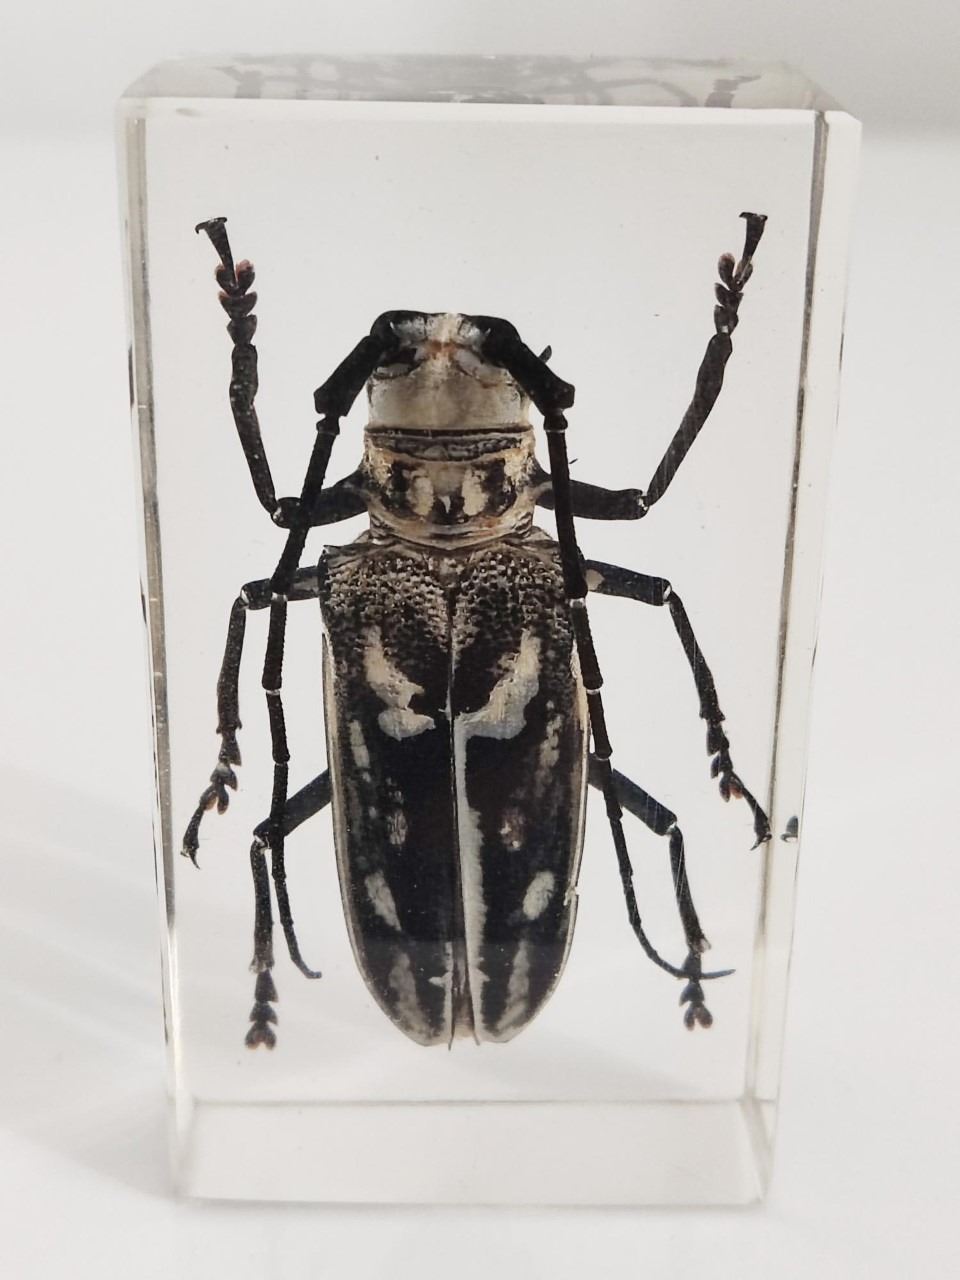 Freadelpha Polyspila beetle in resin block. Obtained from the Democratic Republic of the Congo. 2.